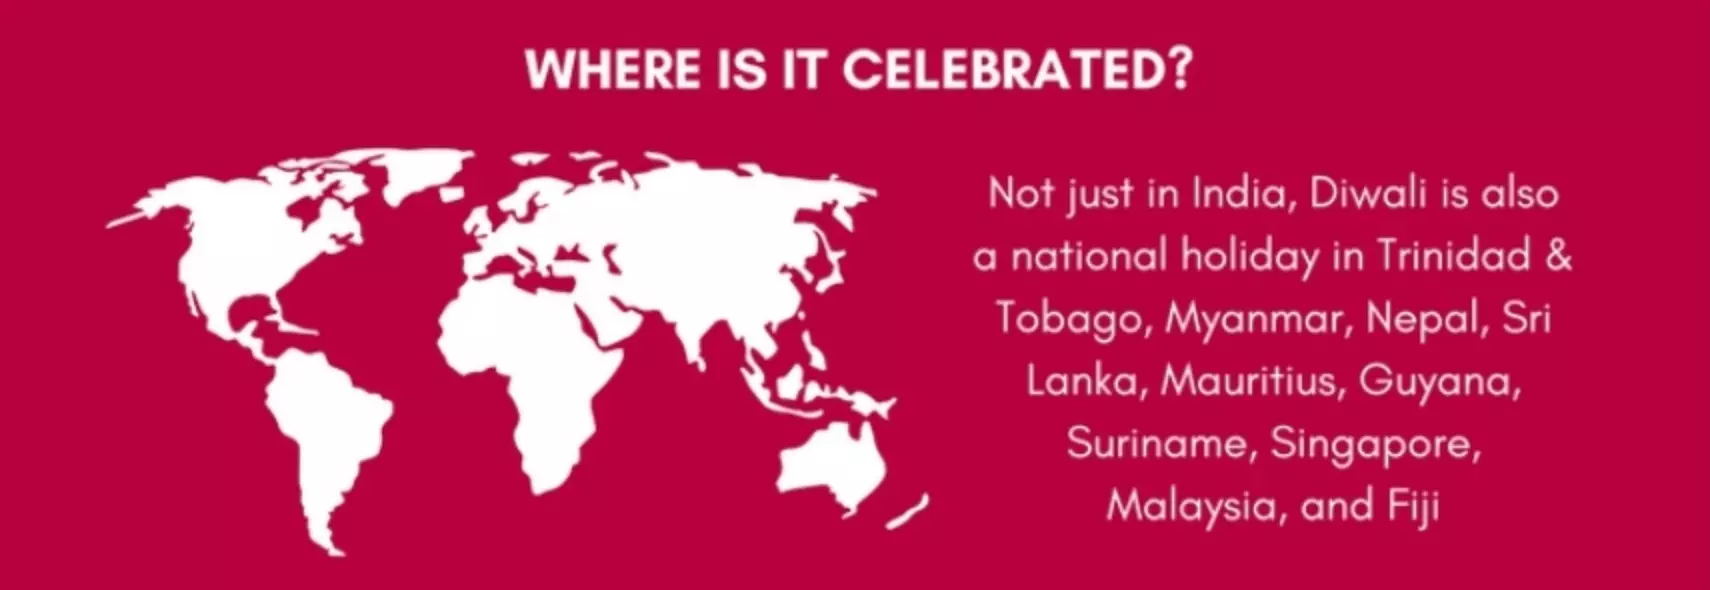 Where_is_Diwali_Celebrated.png